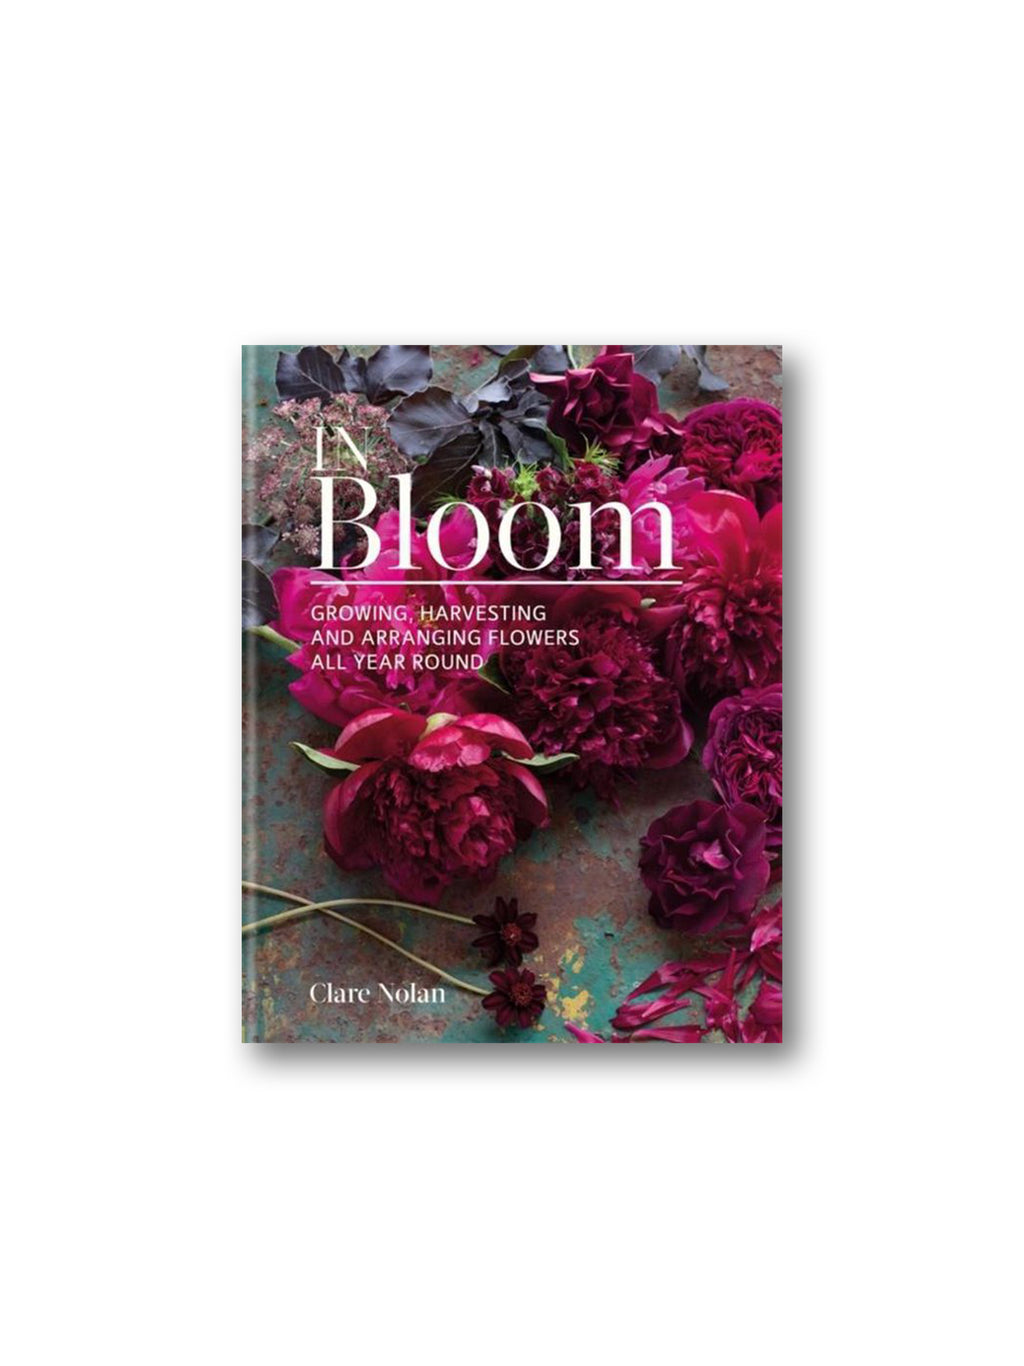 In Bloom : Growing, Harvesting and Arranging Flowers All Year Round